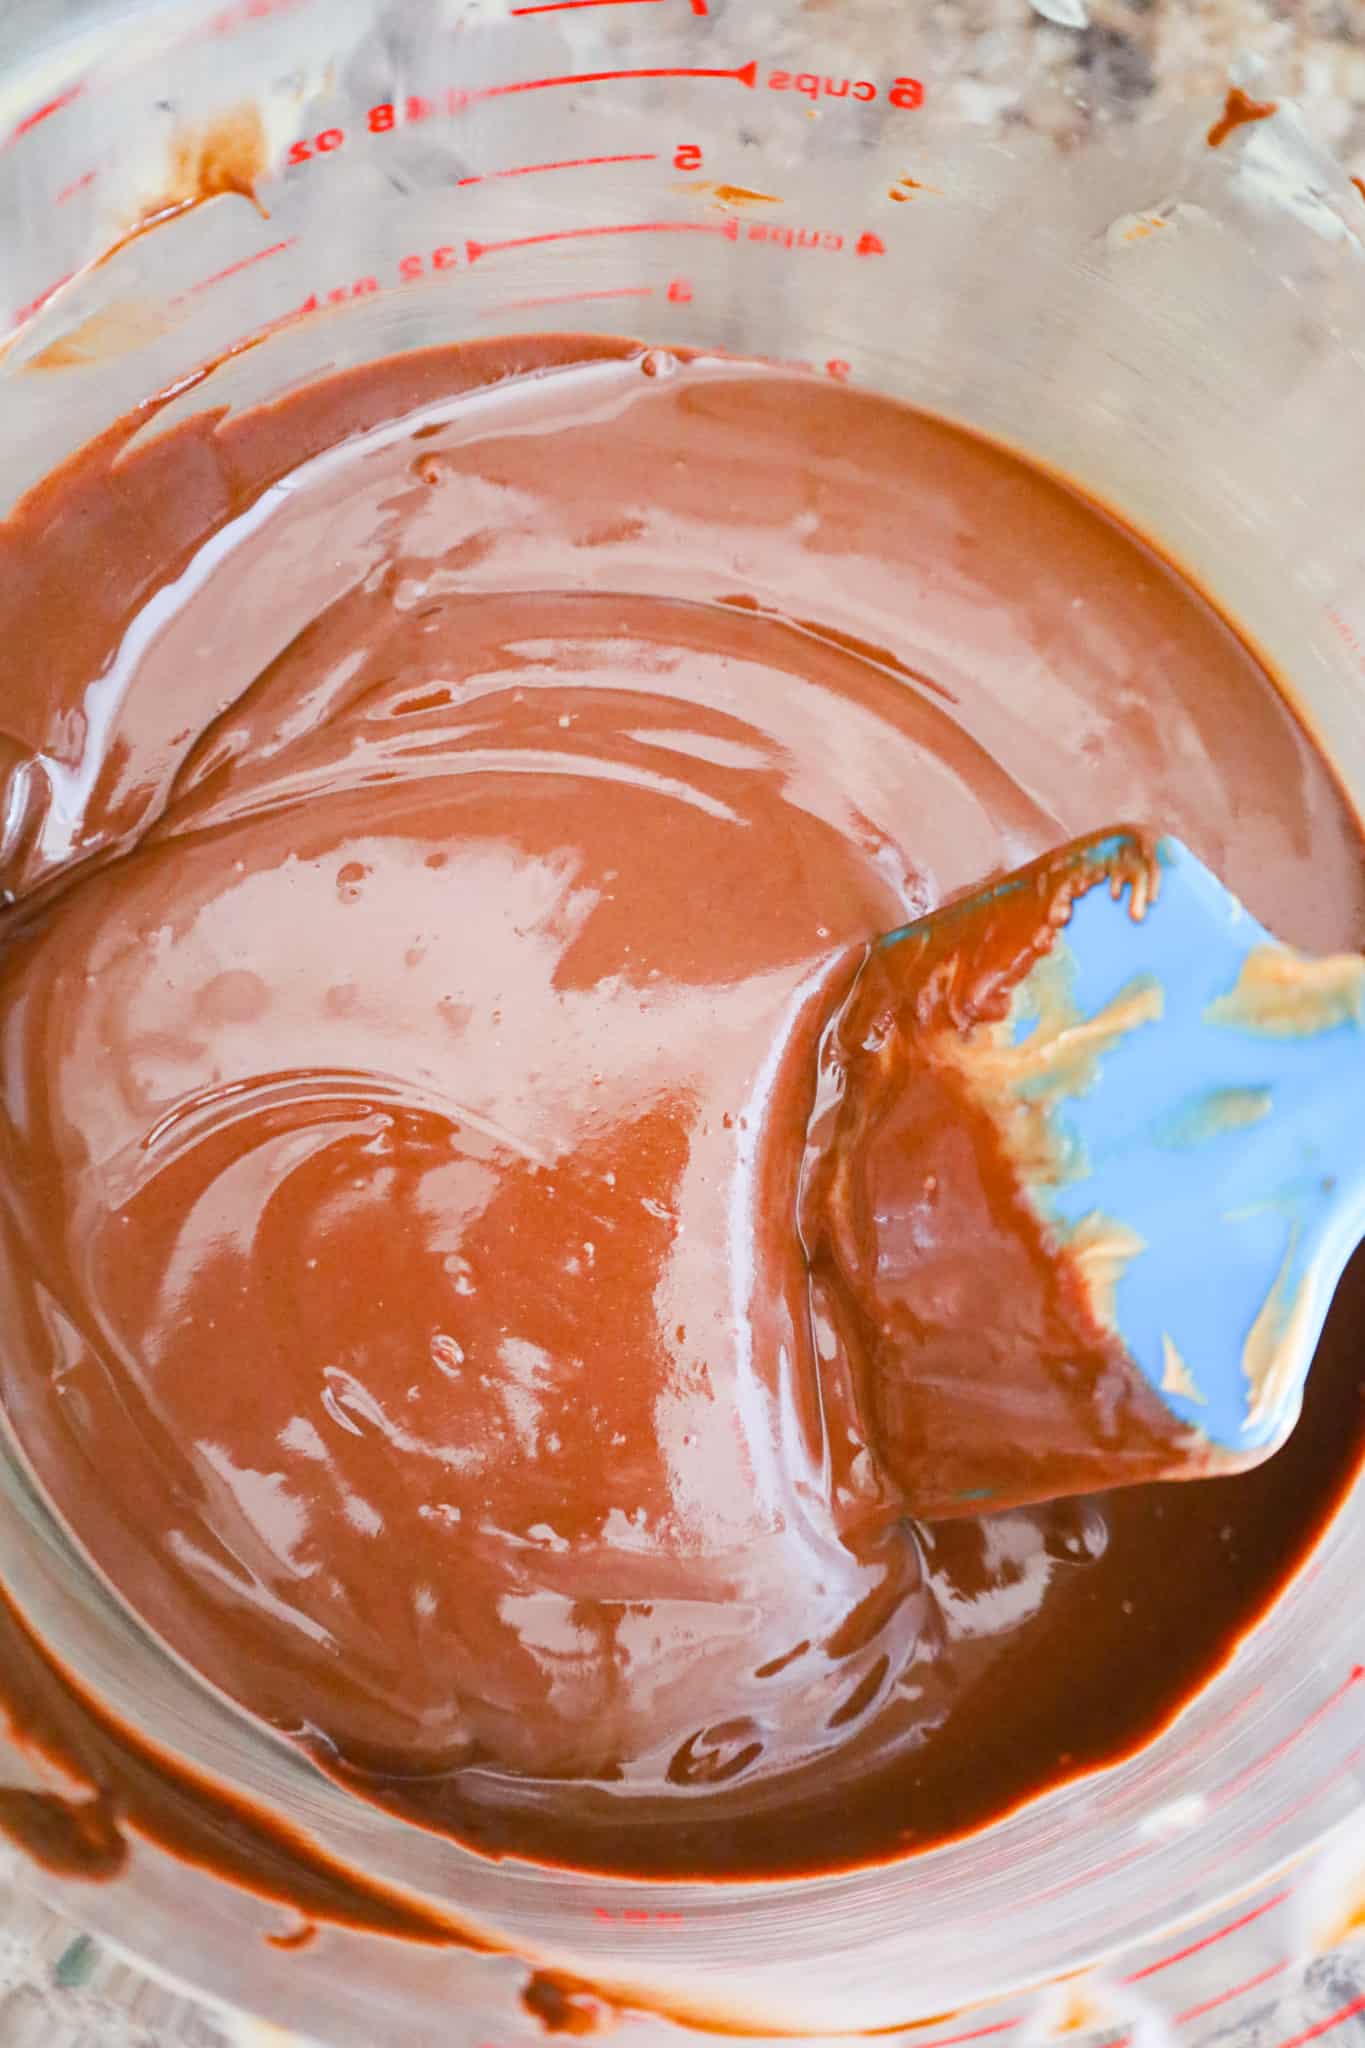 melted chocolate and peanut butter mixture in a large glass bowl